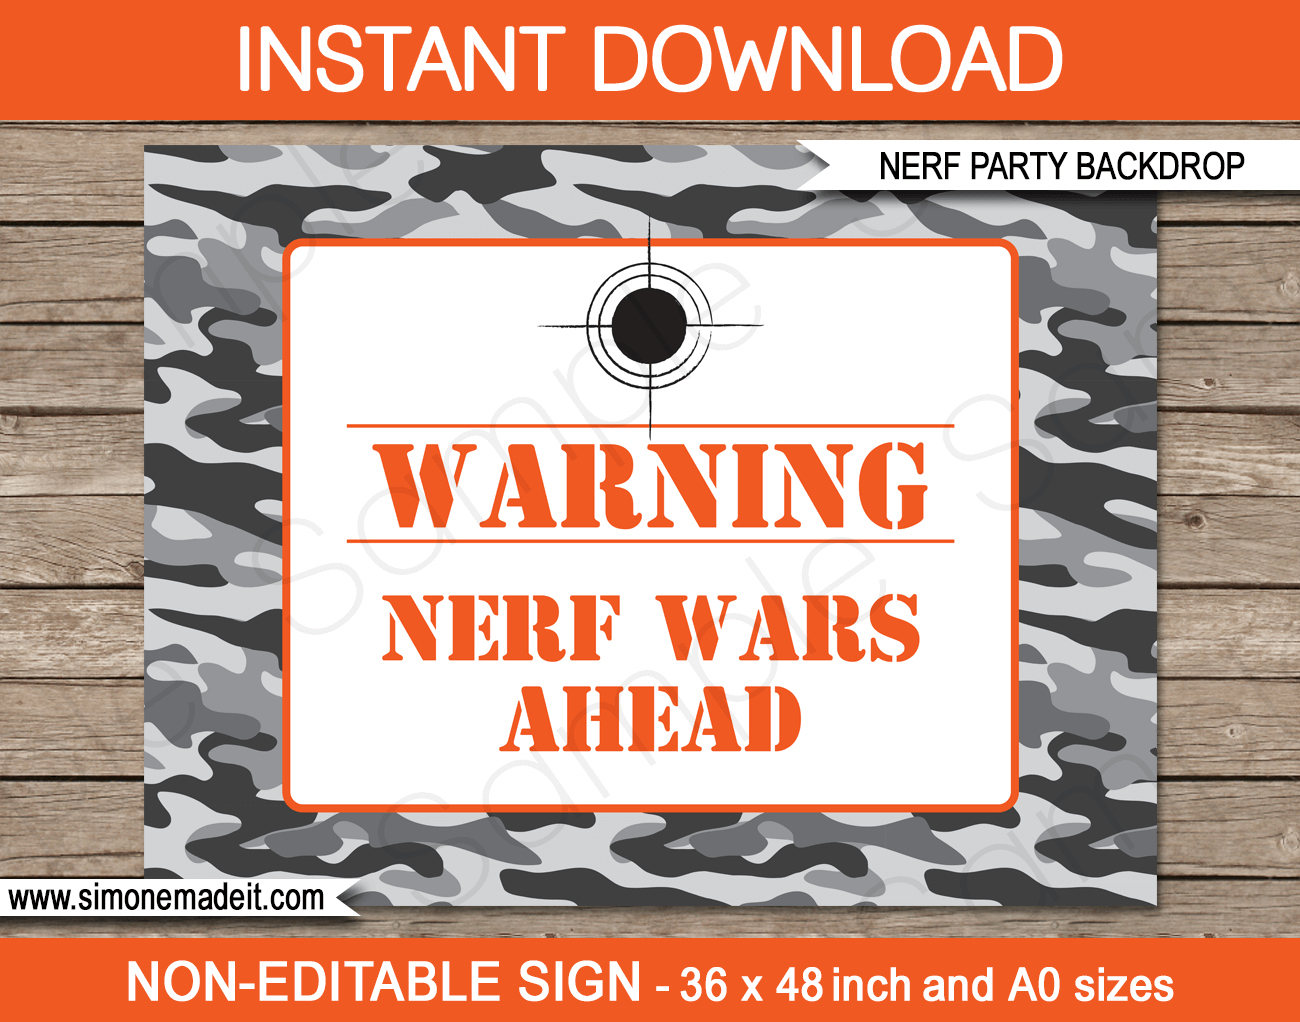 Nerf Party Backdrop or Sign | Printable DIY Template | Birthday Party Decorations | 36x48 inches | A0 | $4.50 Instant Download via SIMONEmadeit.com